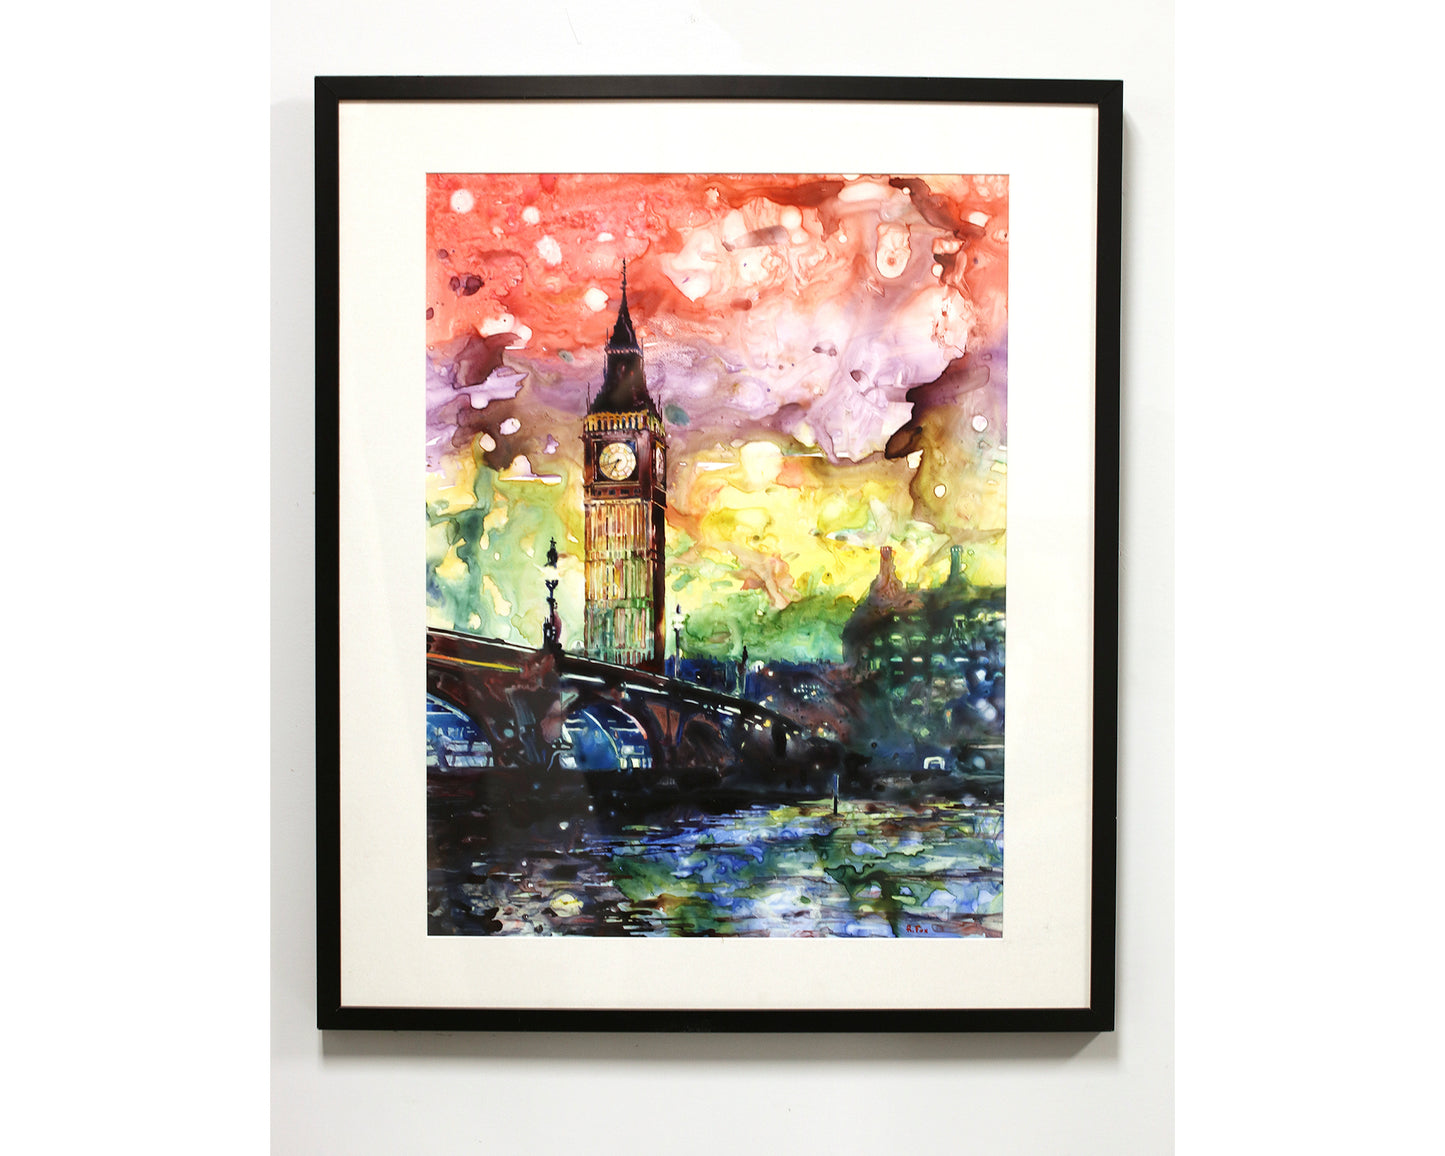 Watercolor painting on YUPO synthetic paper of Big Ben (Clock Tower) at sunset- London, England (original)